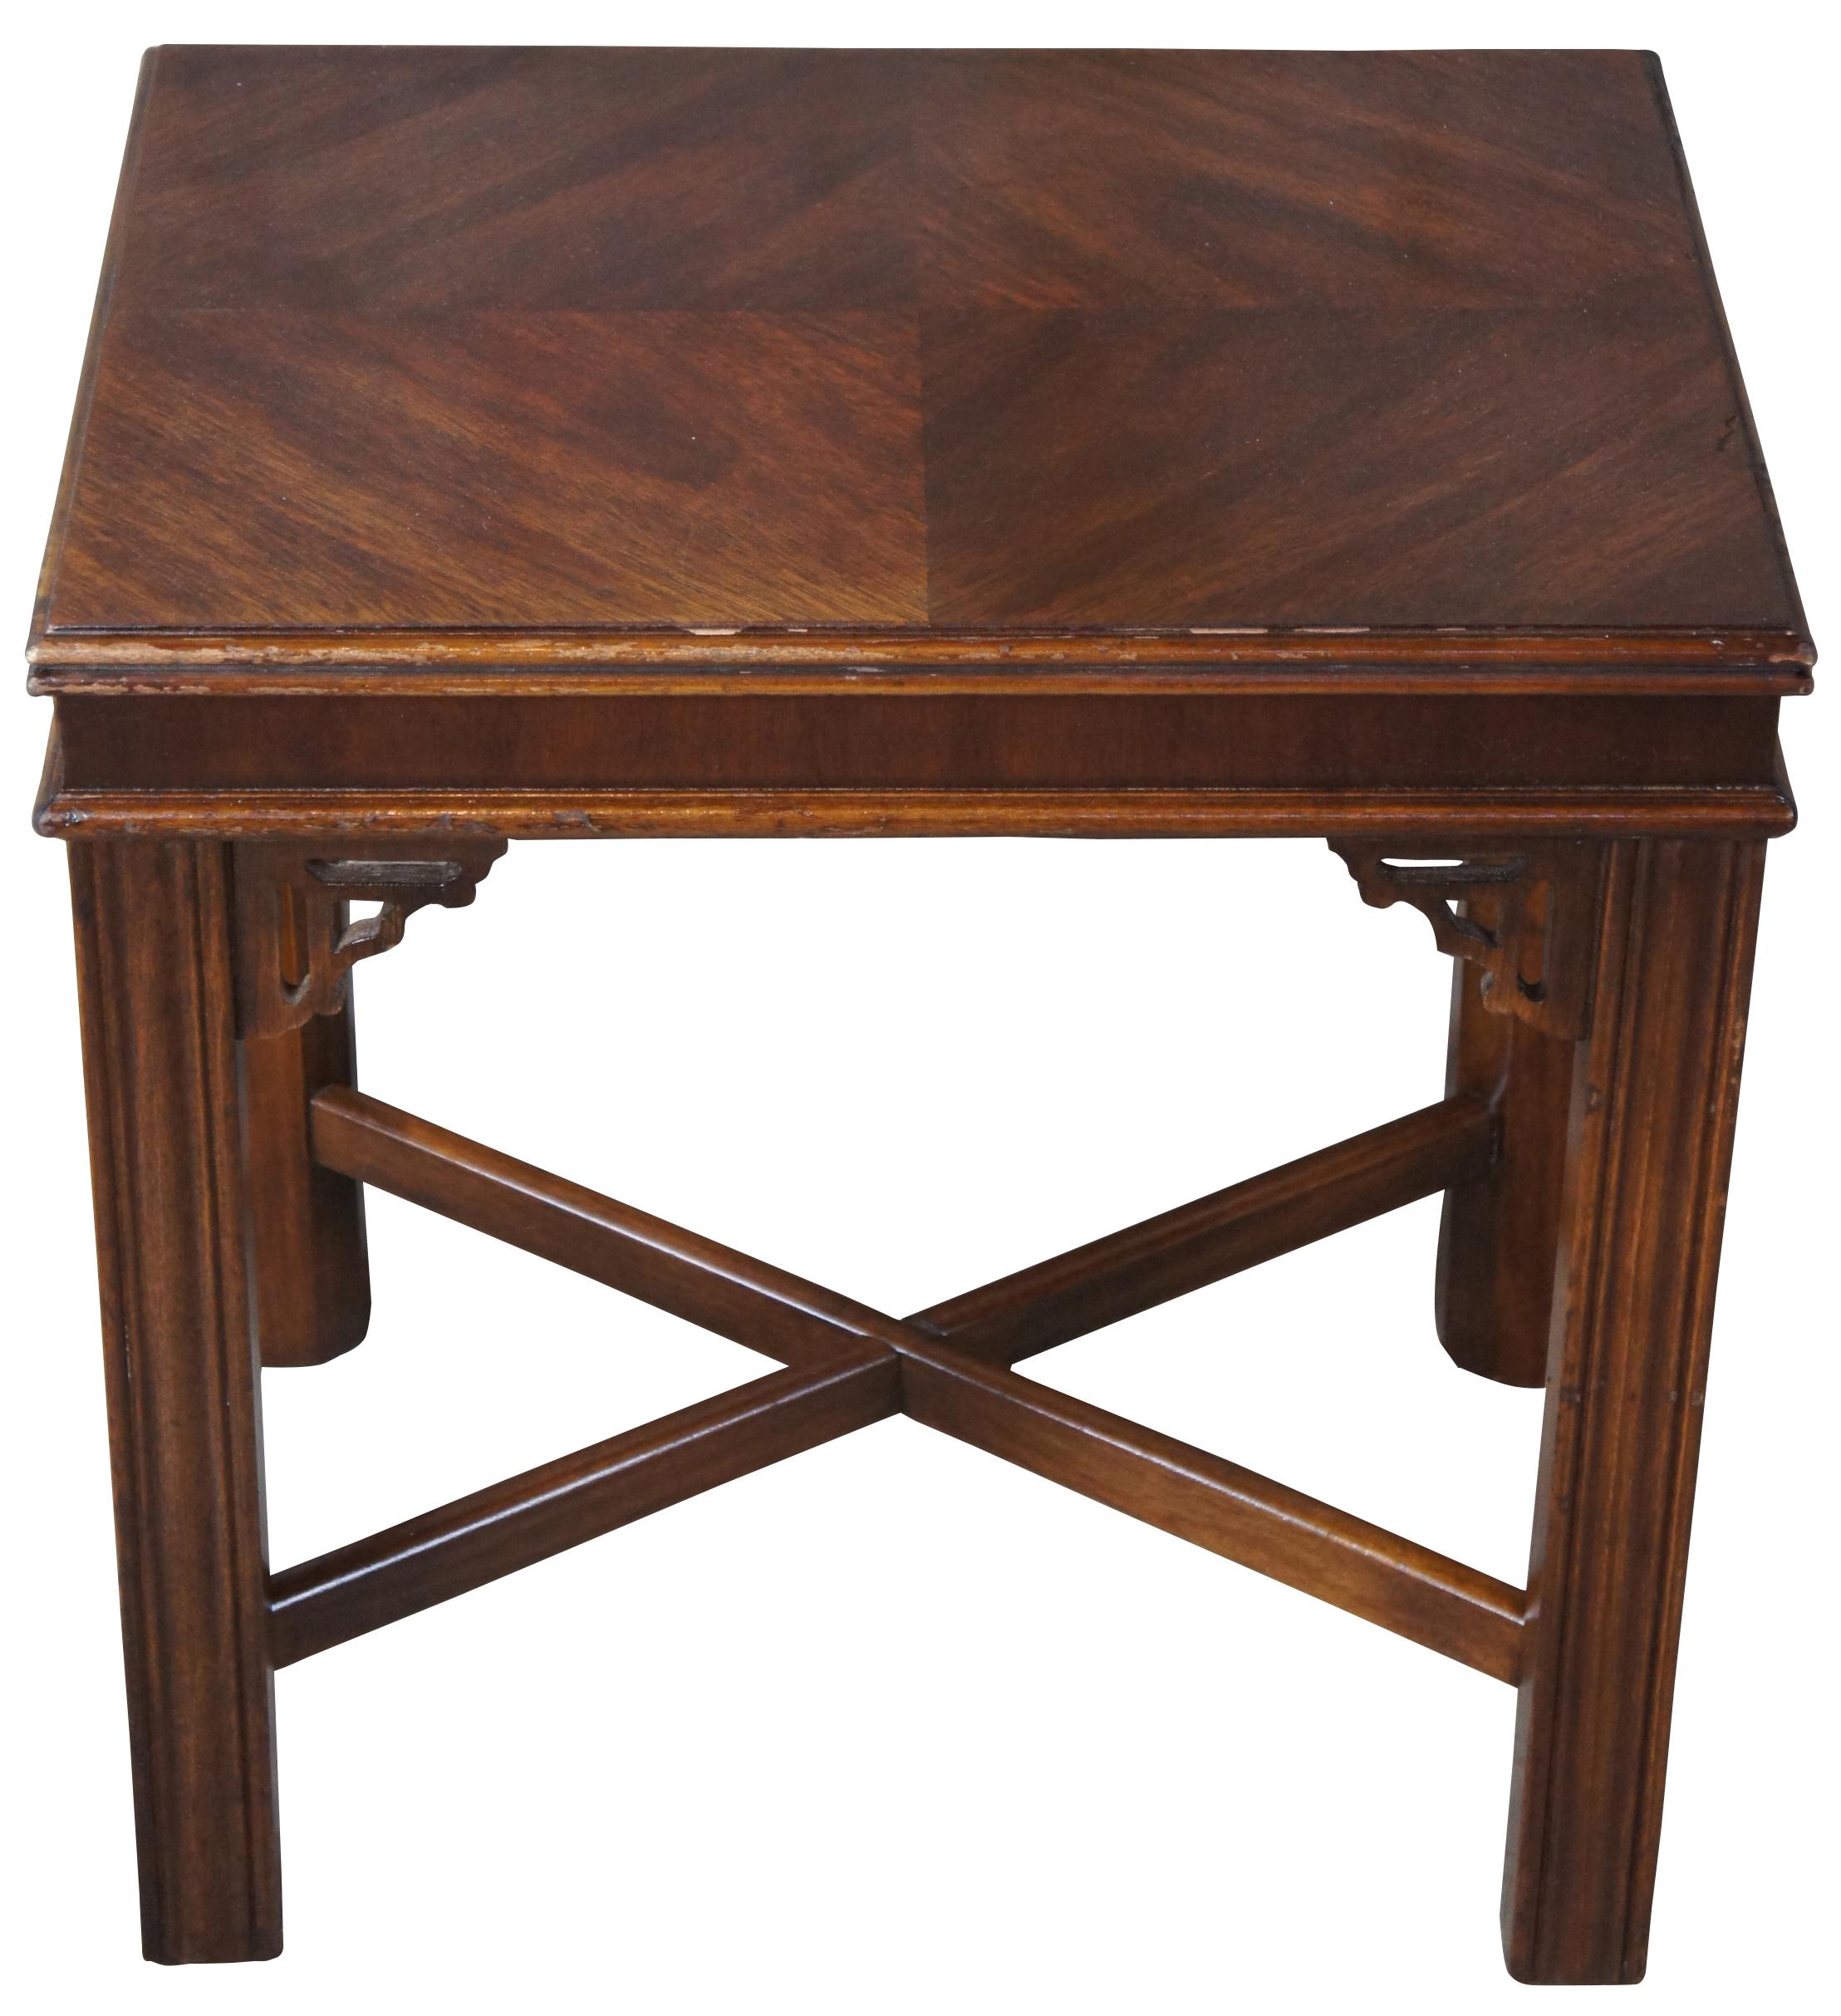 Chinese Chippendale side table by Lane Furniture, circa 1980, Altavista Virginia. Made from walnut with a bookmatched veneered top over fluted legs connected by X-stretcher.